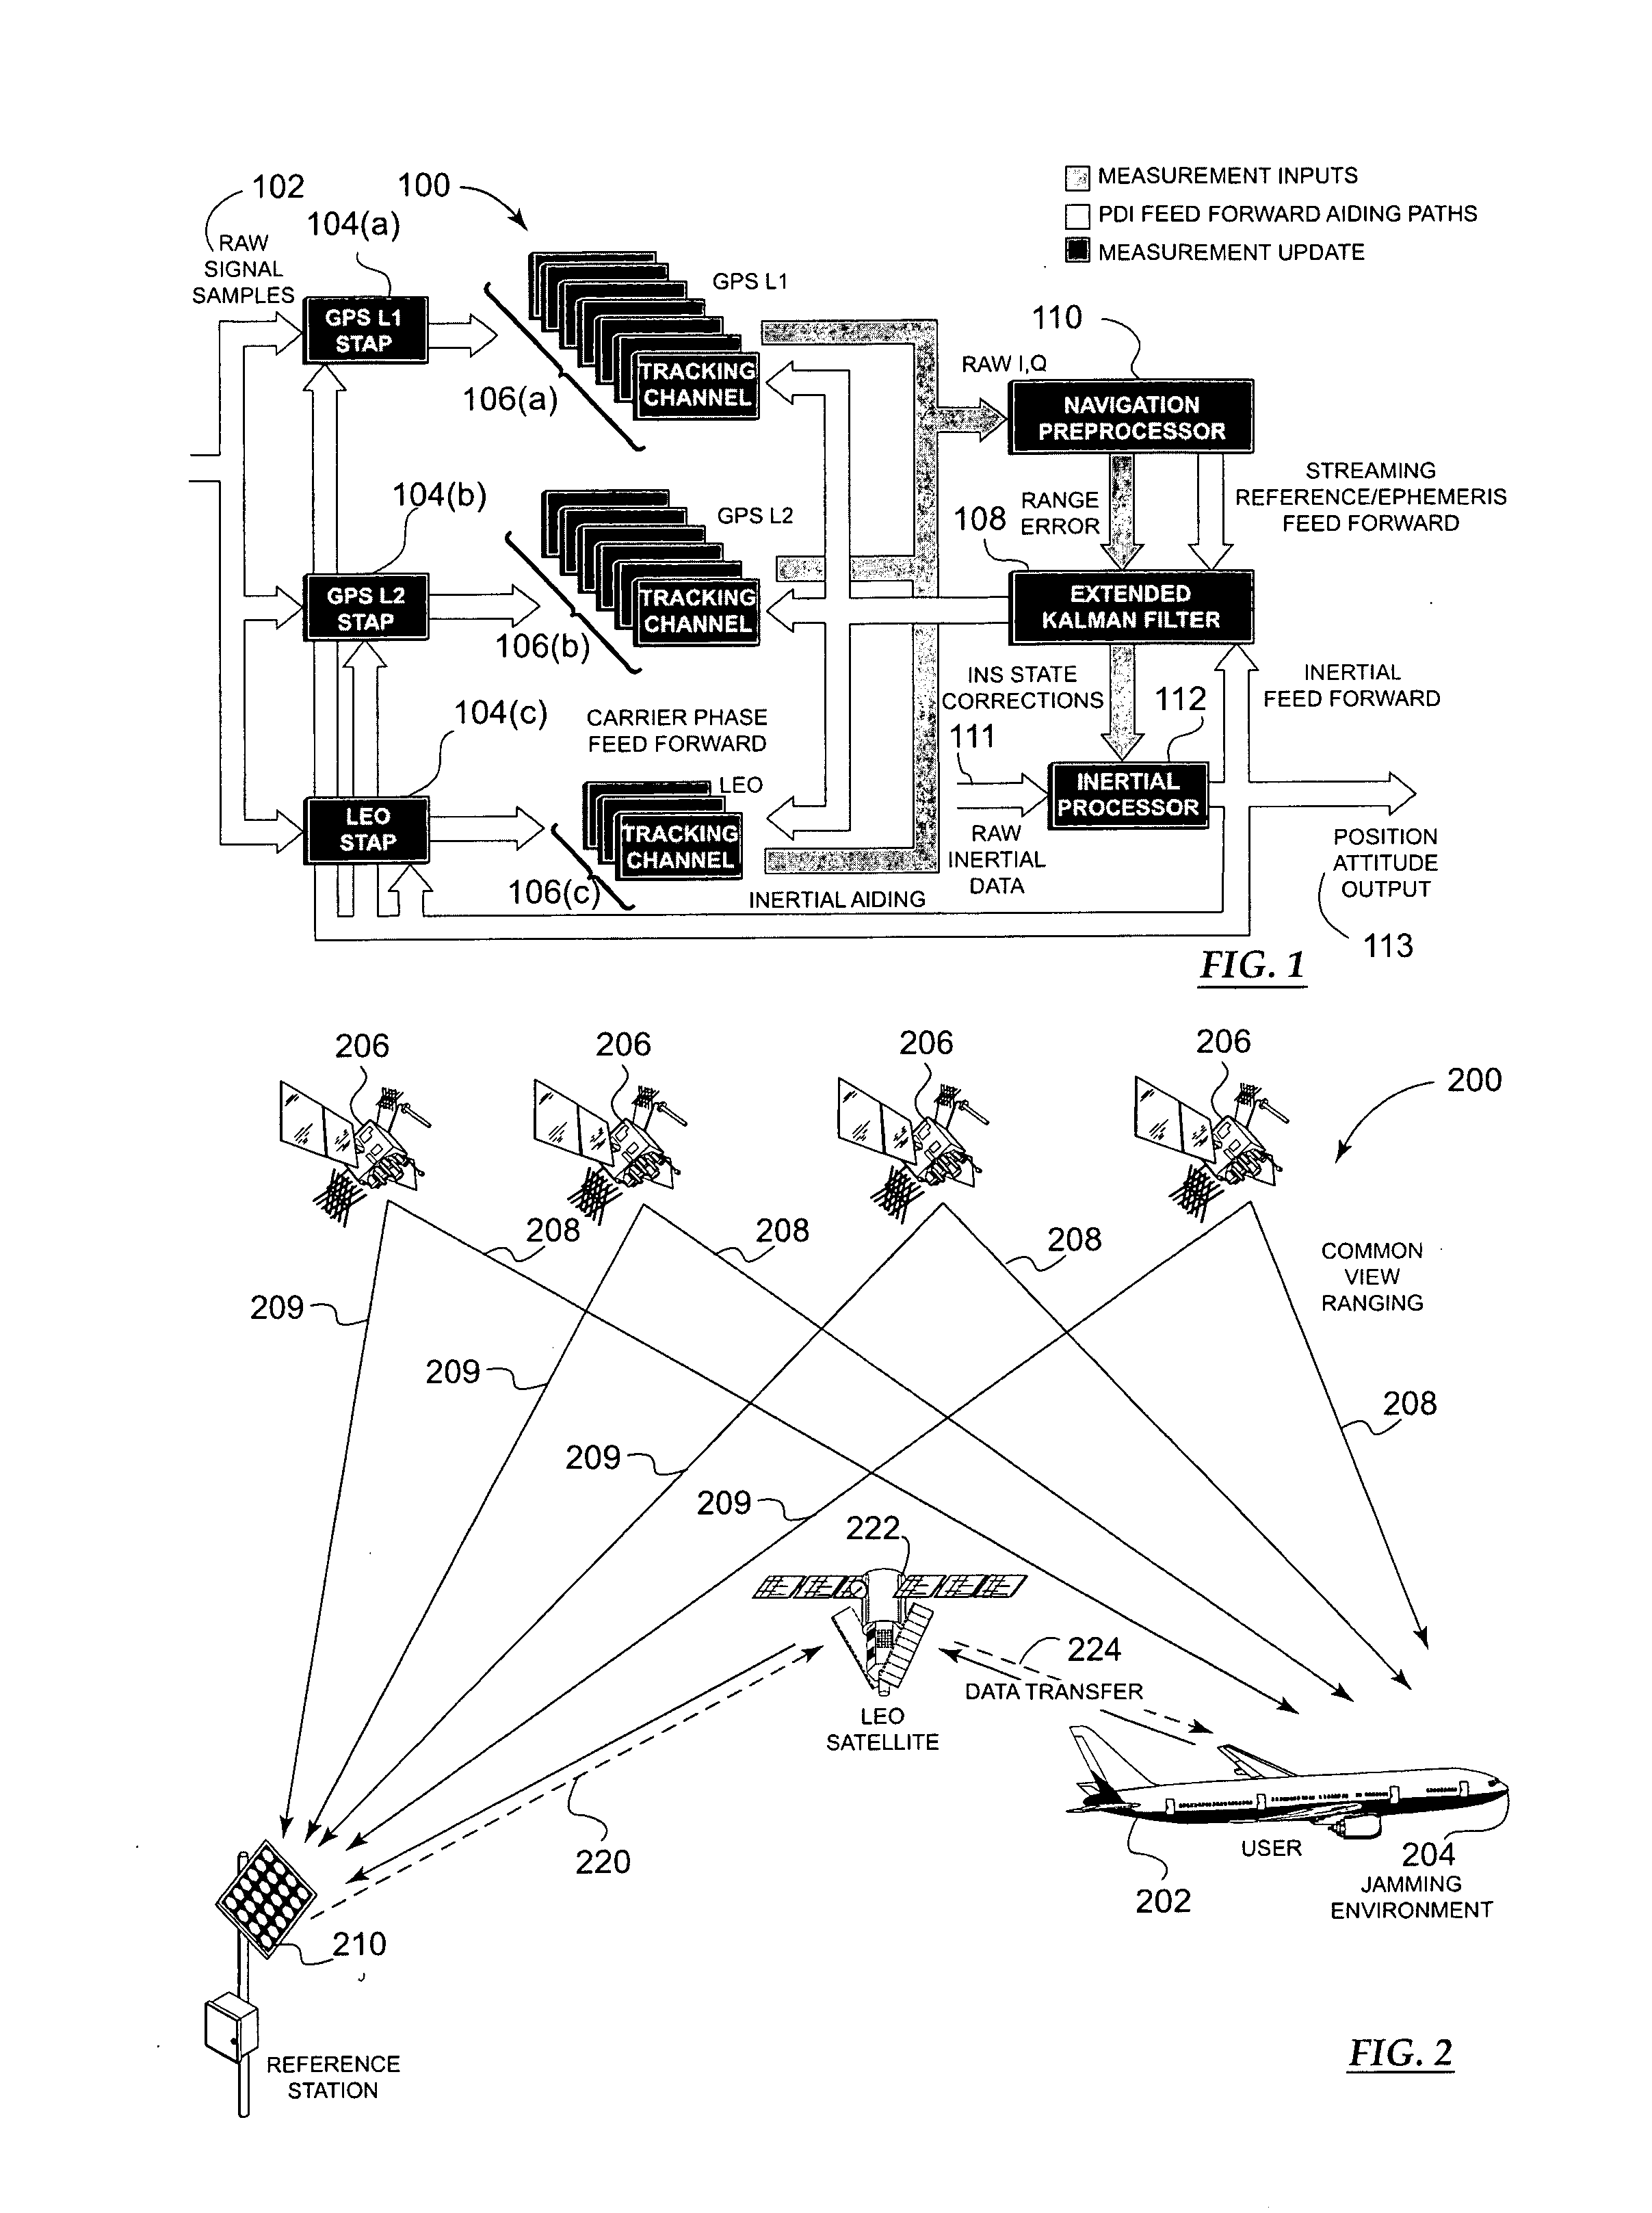 Methods and apparatus for a navigation system with reduced susceptibility to interference and jamming